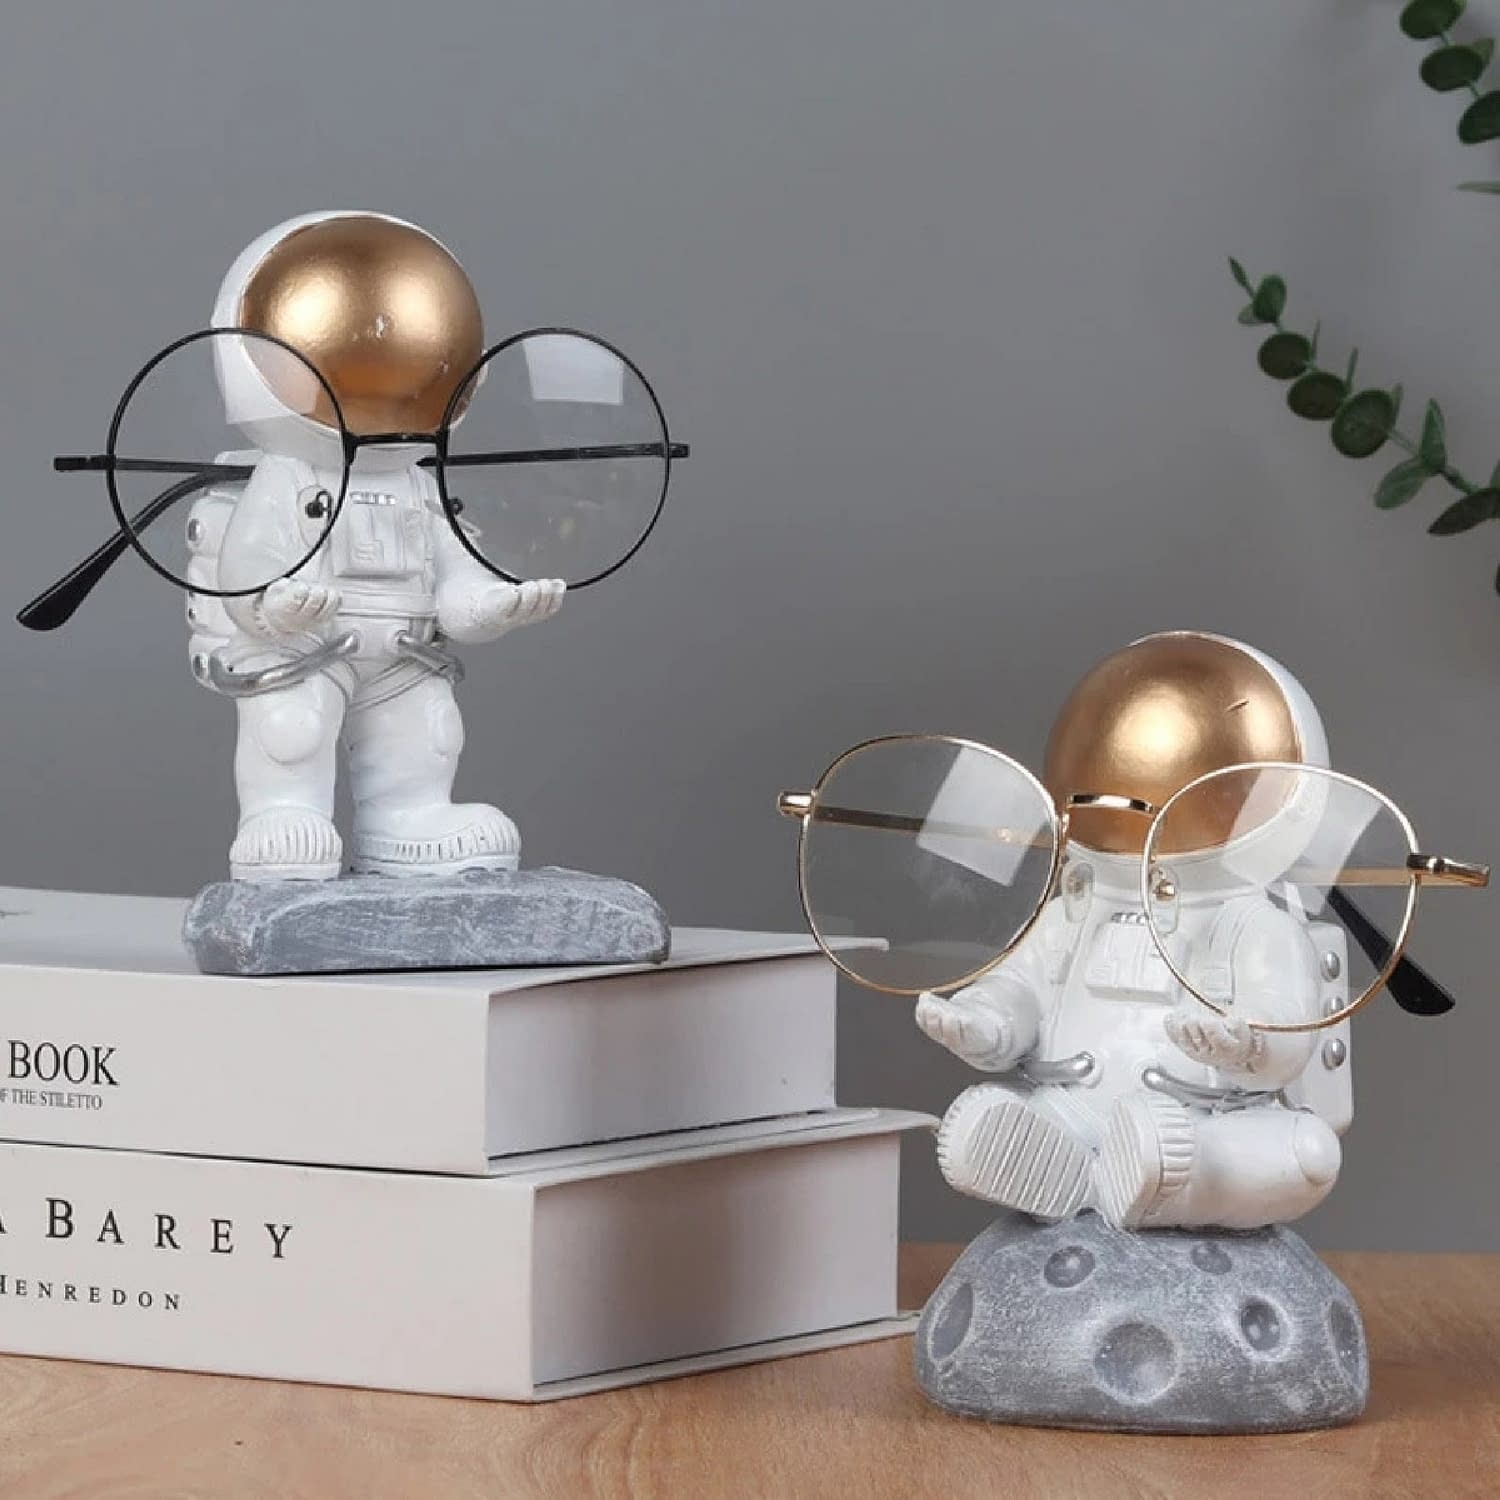 Two astronaut figures holding eye glasses standing on a desk and books.